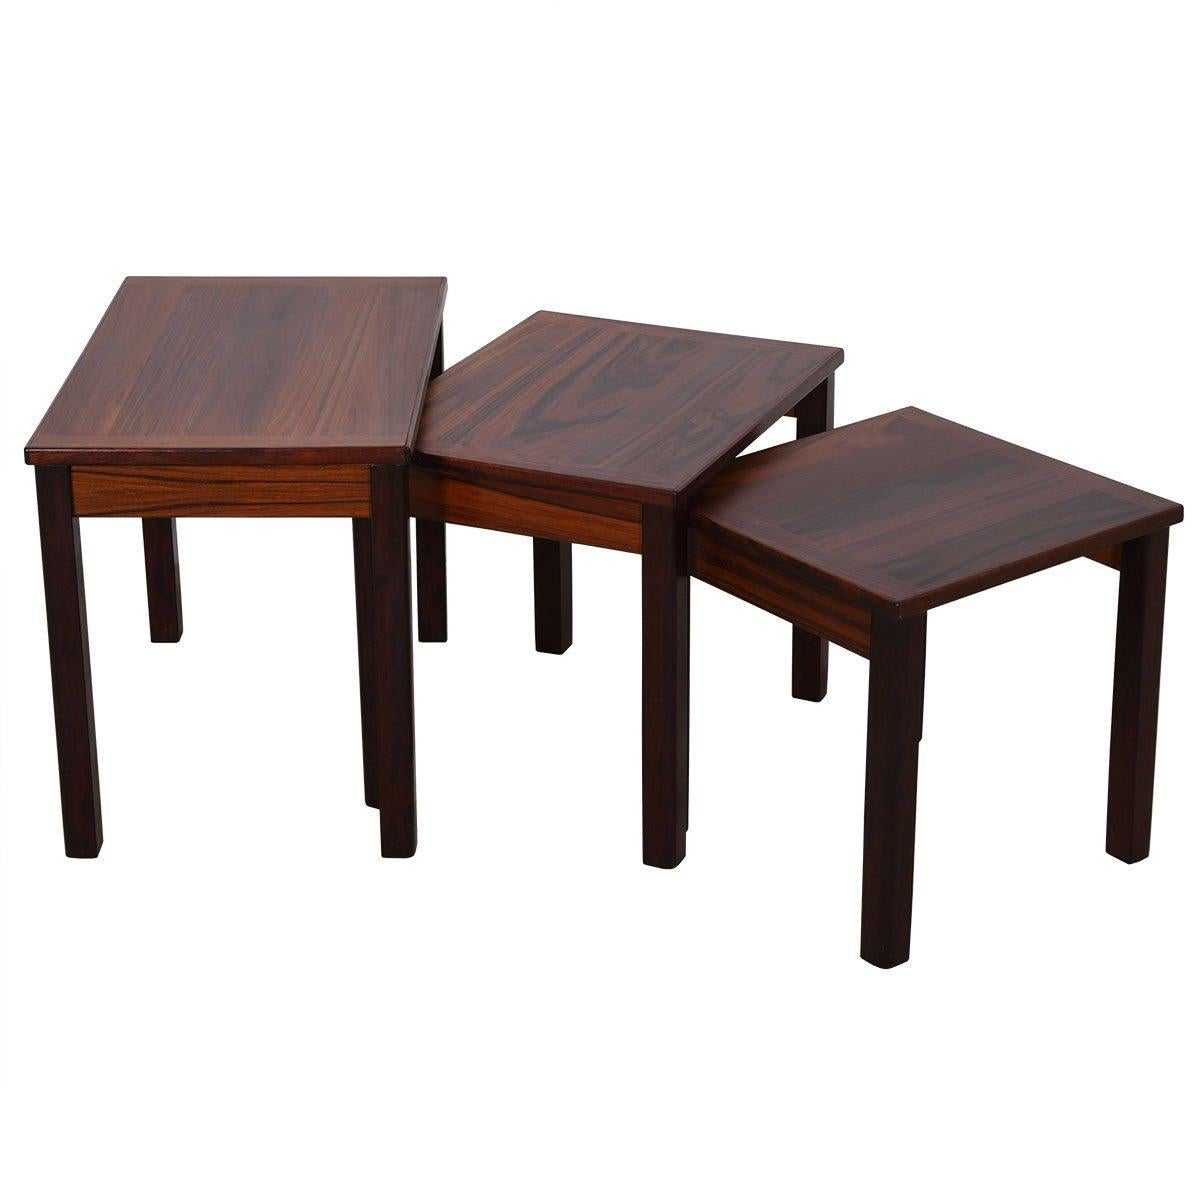 This is a beautiful and sturdy set of three nesting table in rosewood. So handy to have in a room for those times when you need extra table surface. Easy to store and move around. The rosewood has aged to a mellow patina.


*Due to time, labor